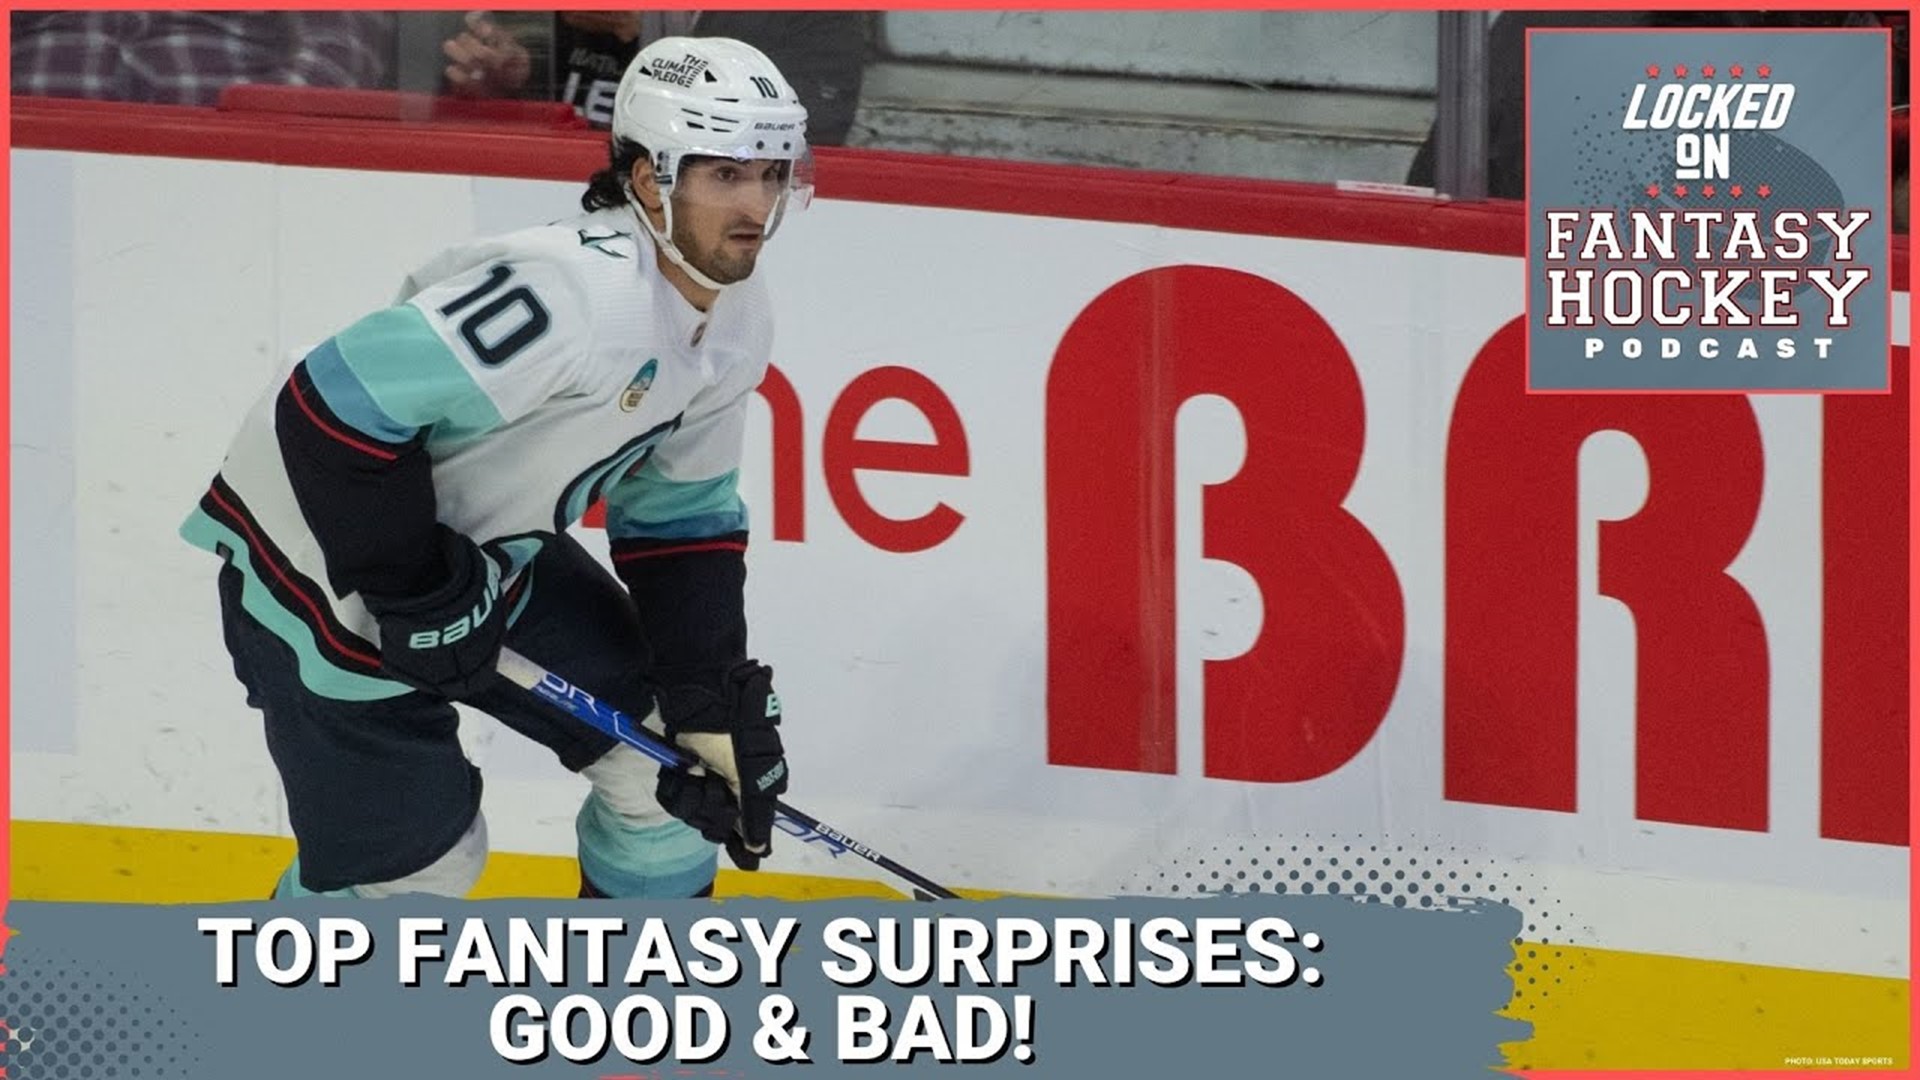 Flip and Steele take a look into a number of different surprising NHL and fantasy hockey situations that have surprised - both good and bad.